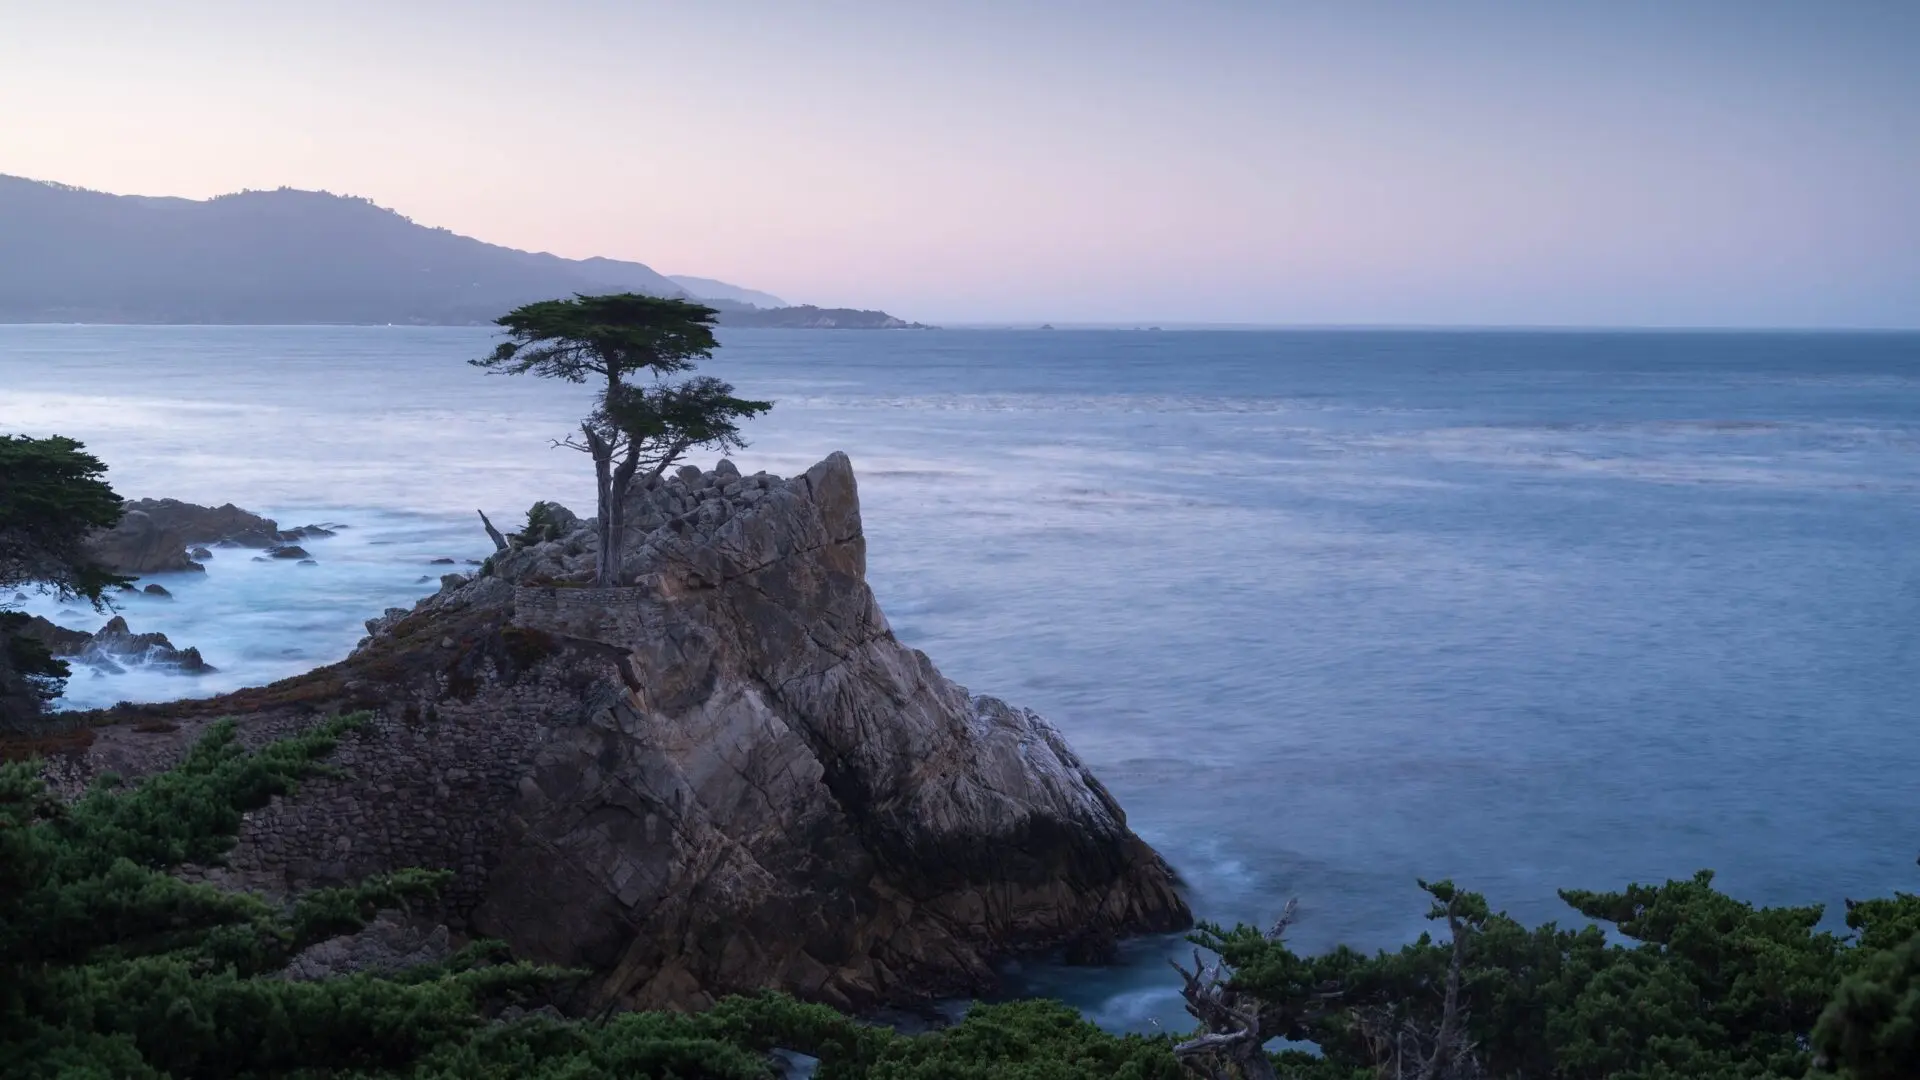 Download The New macOS Monterey Wallpaper For Any Device